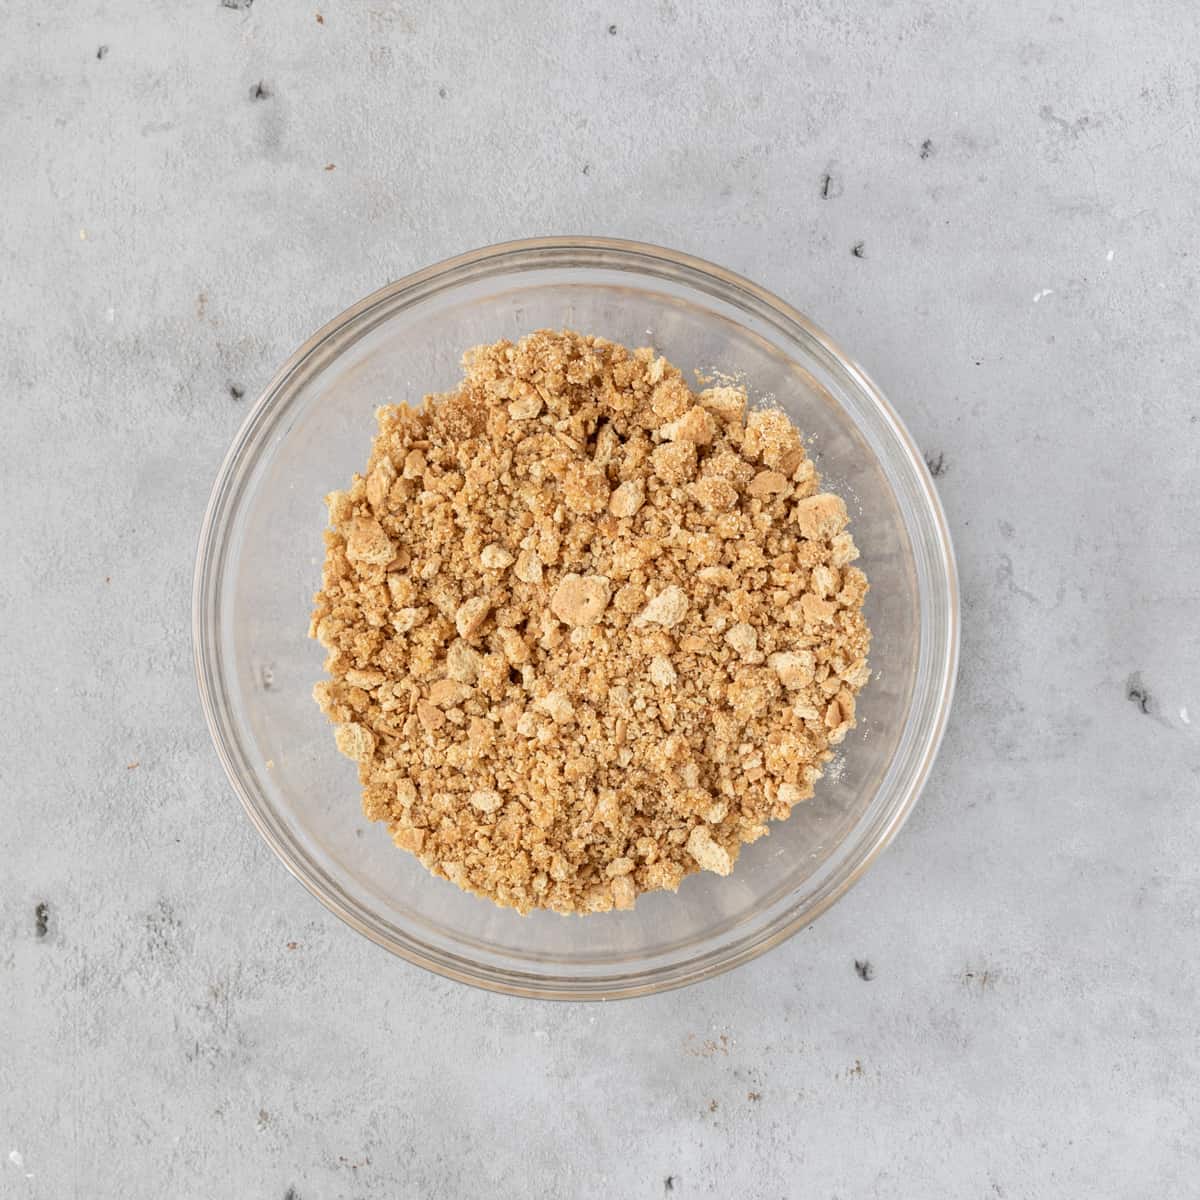 the graham cracker crust ingredients combined in a glass bowl on a grey background